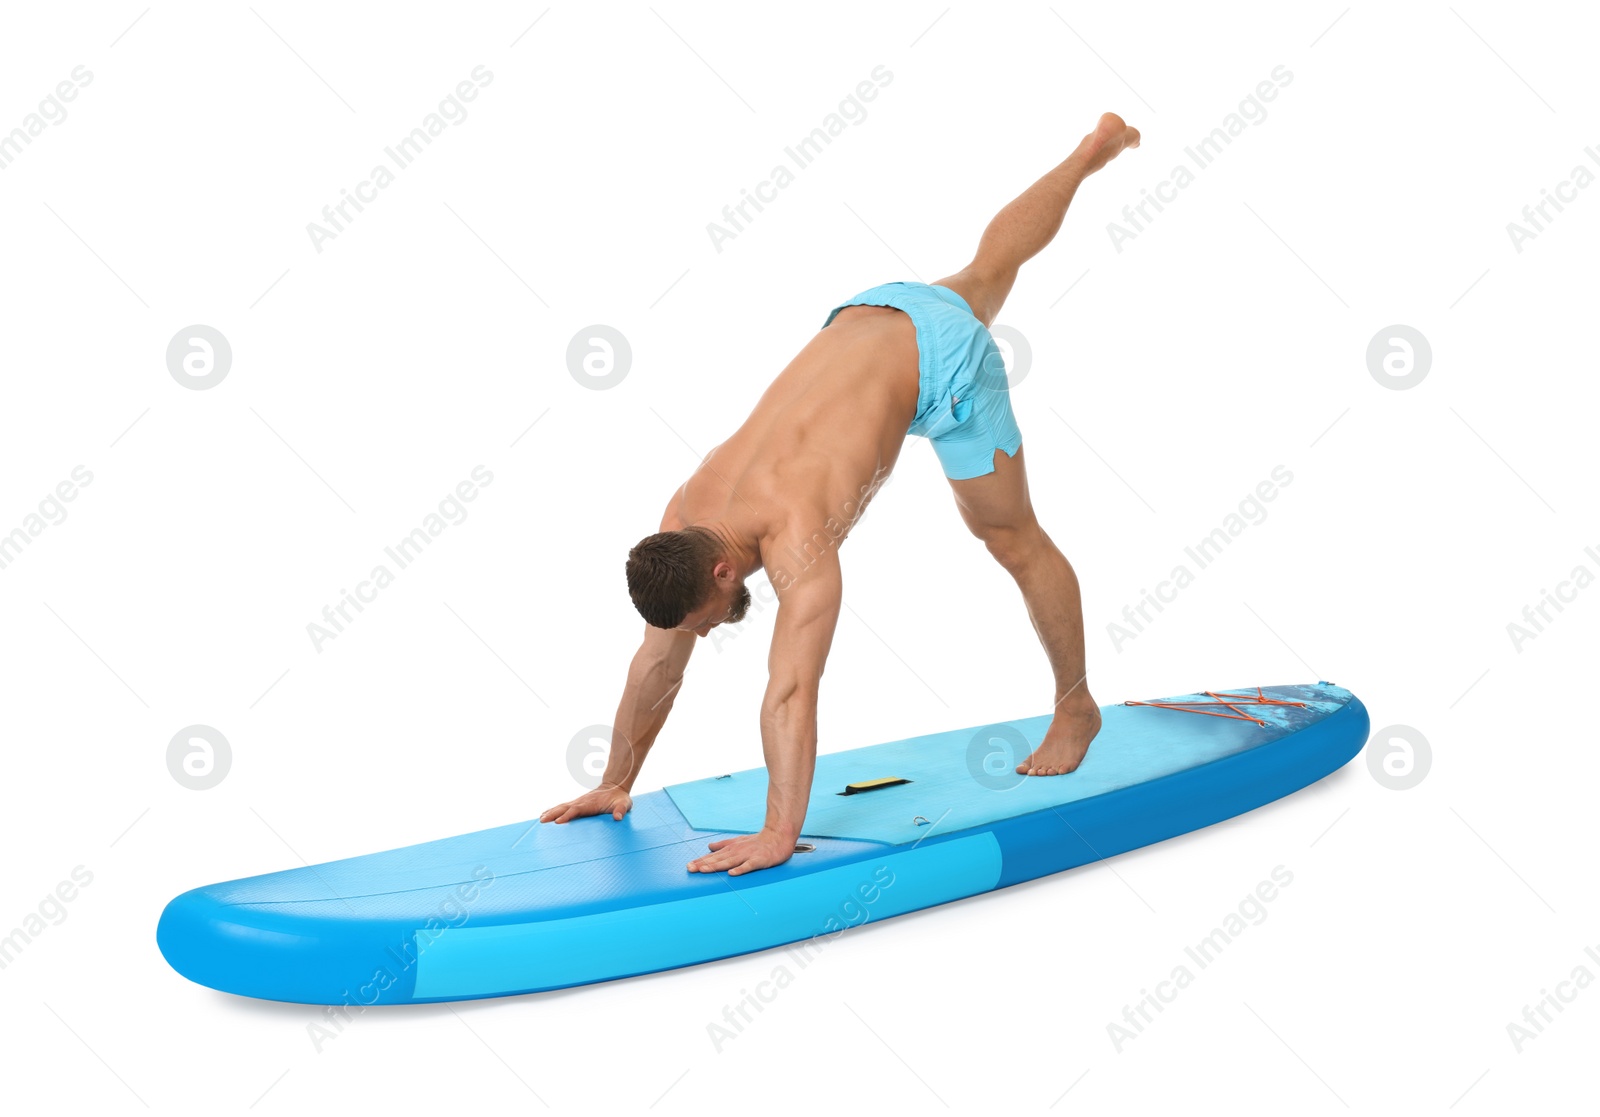 Photo of Handsome man practicing yoga on blue SUP board against white background